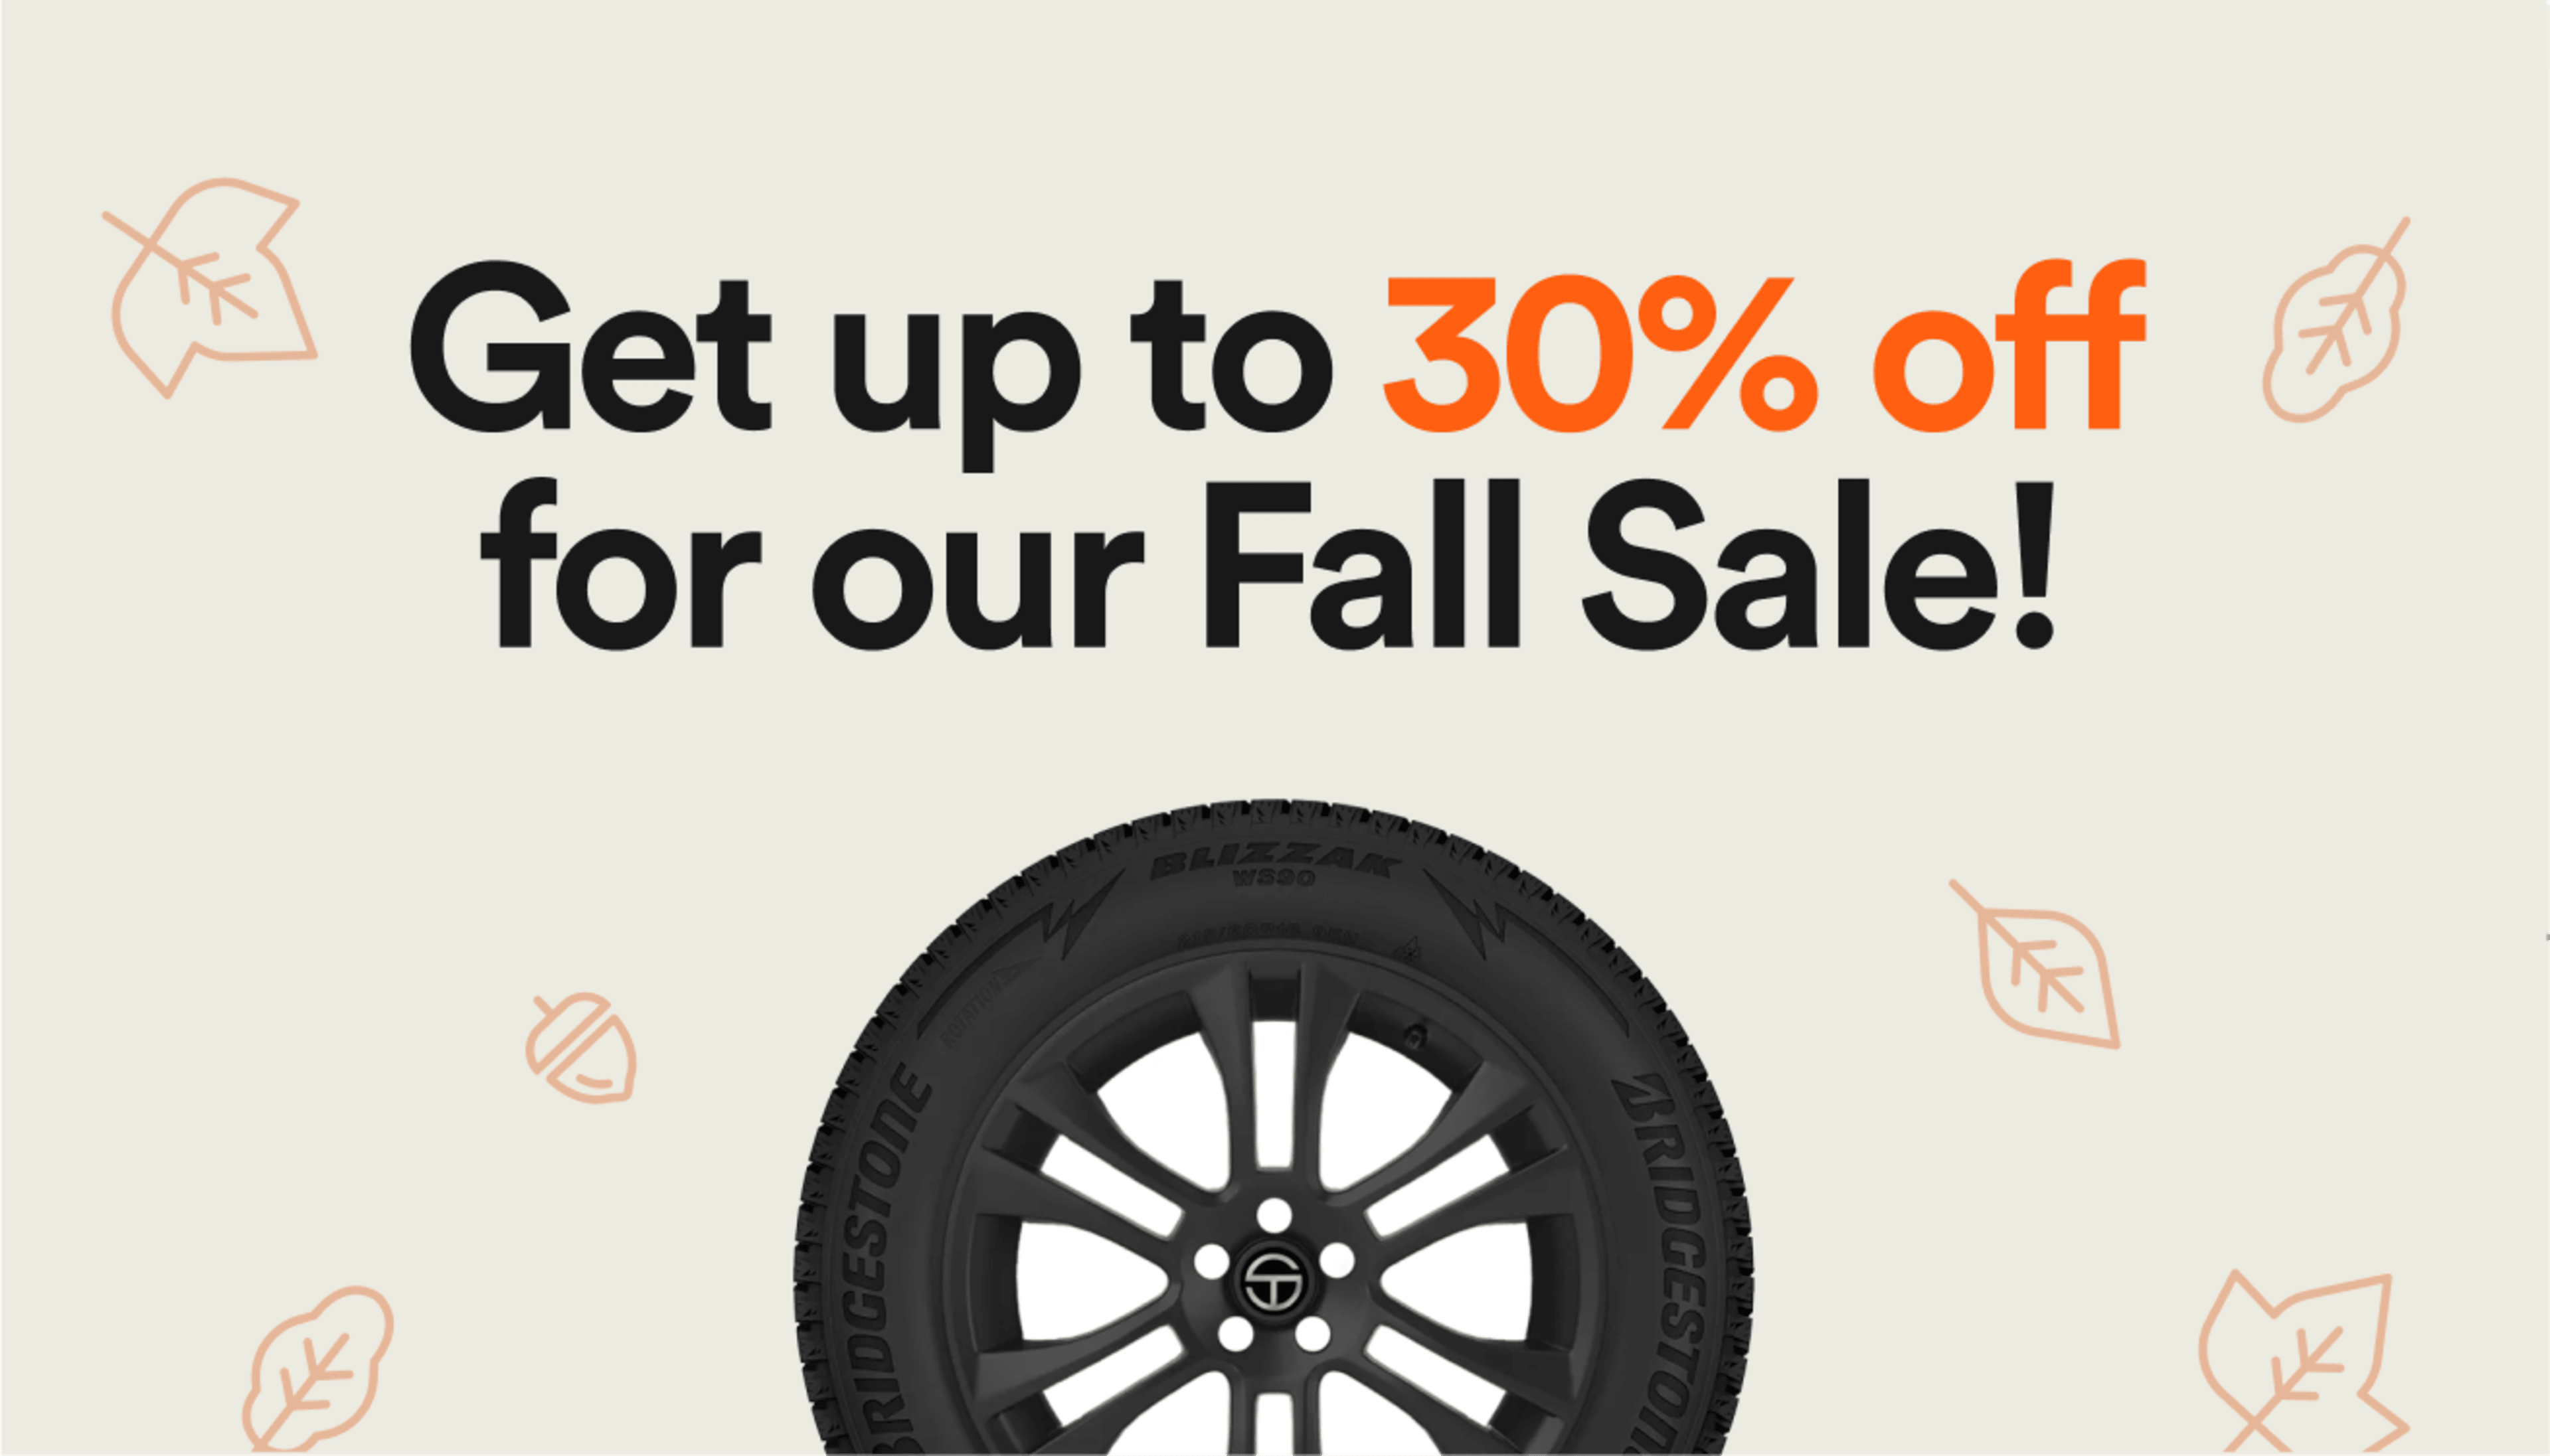 fall-tire-sale-save-on-thousands-of-tires-site-wide-with-instant-savings-rebates-and